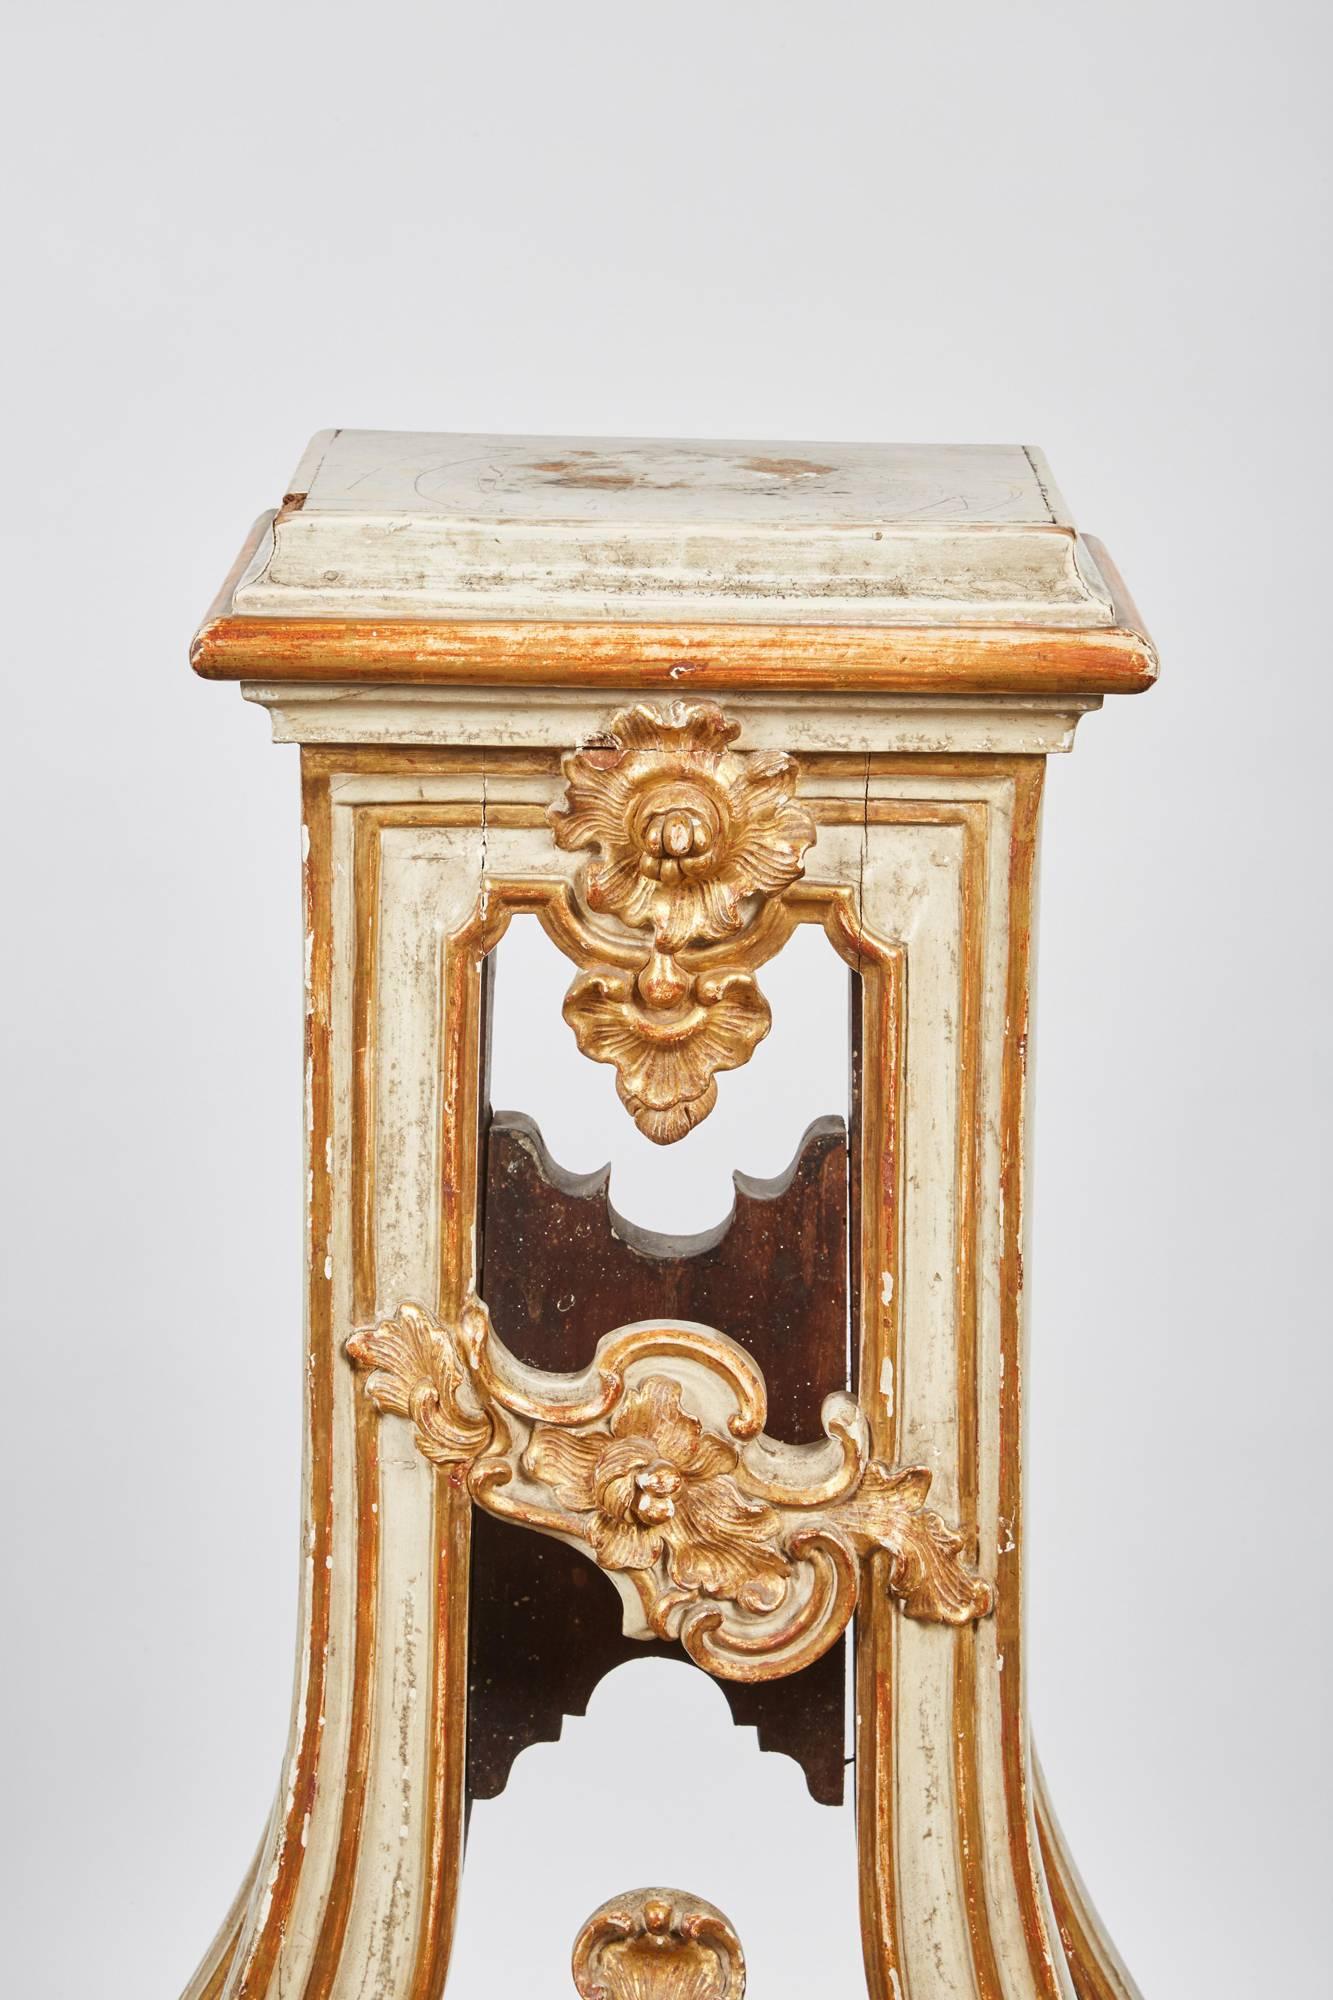 Pair of 18th Century Italian Rococo Cream Painted and Parcel Gilt-Pedestal For Sale 1